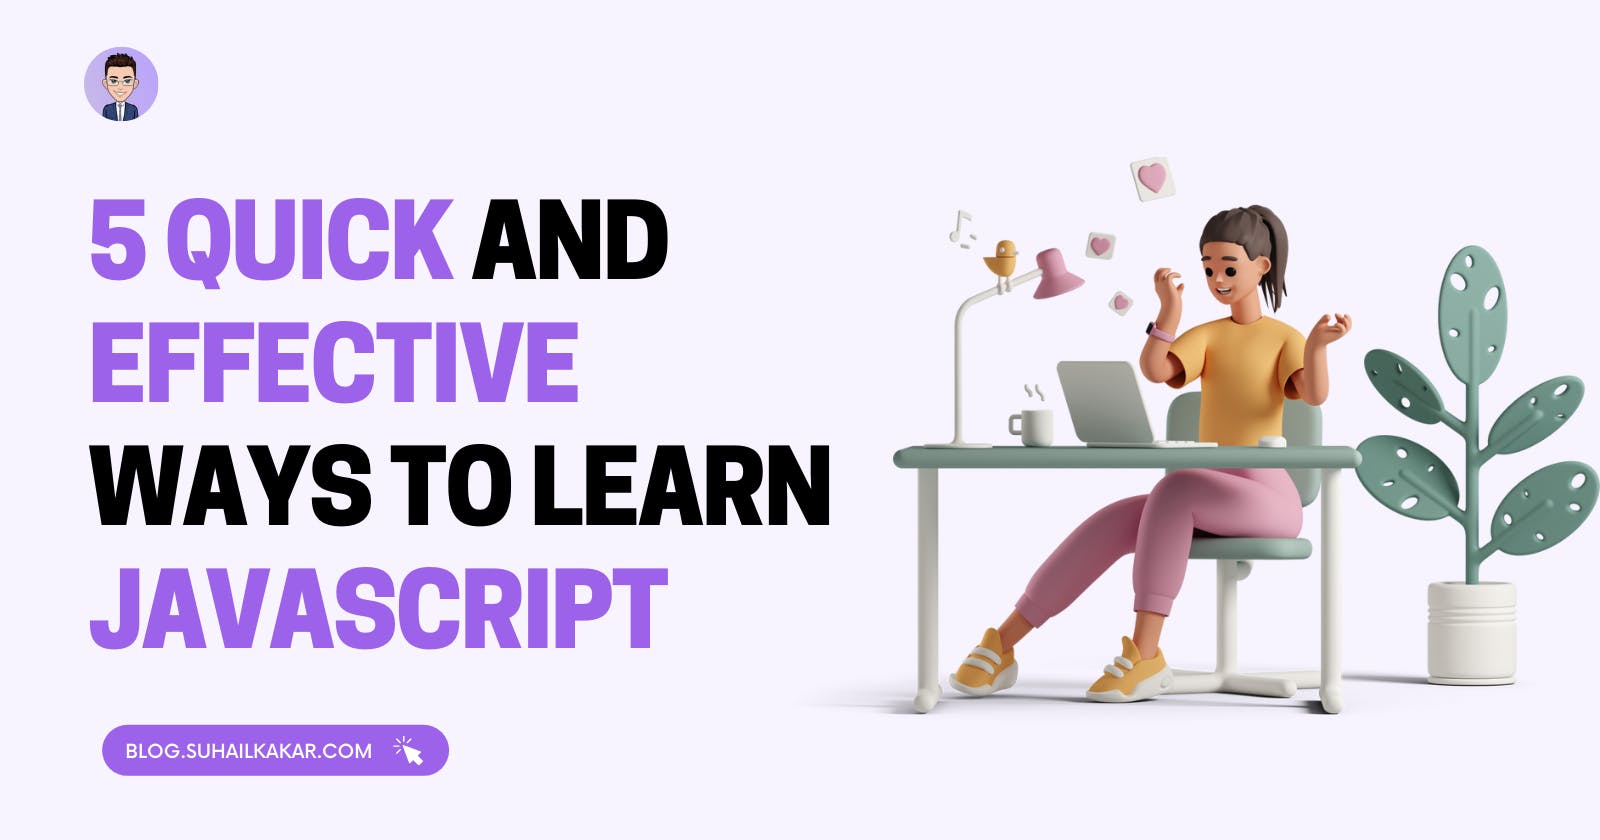 5 Quick and Effective Ways to Learn JavaScript